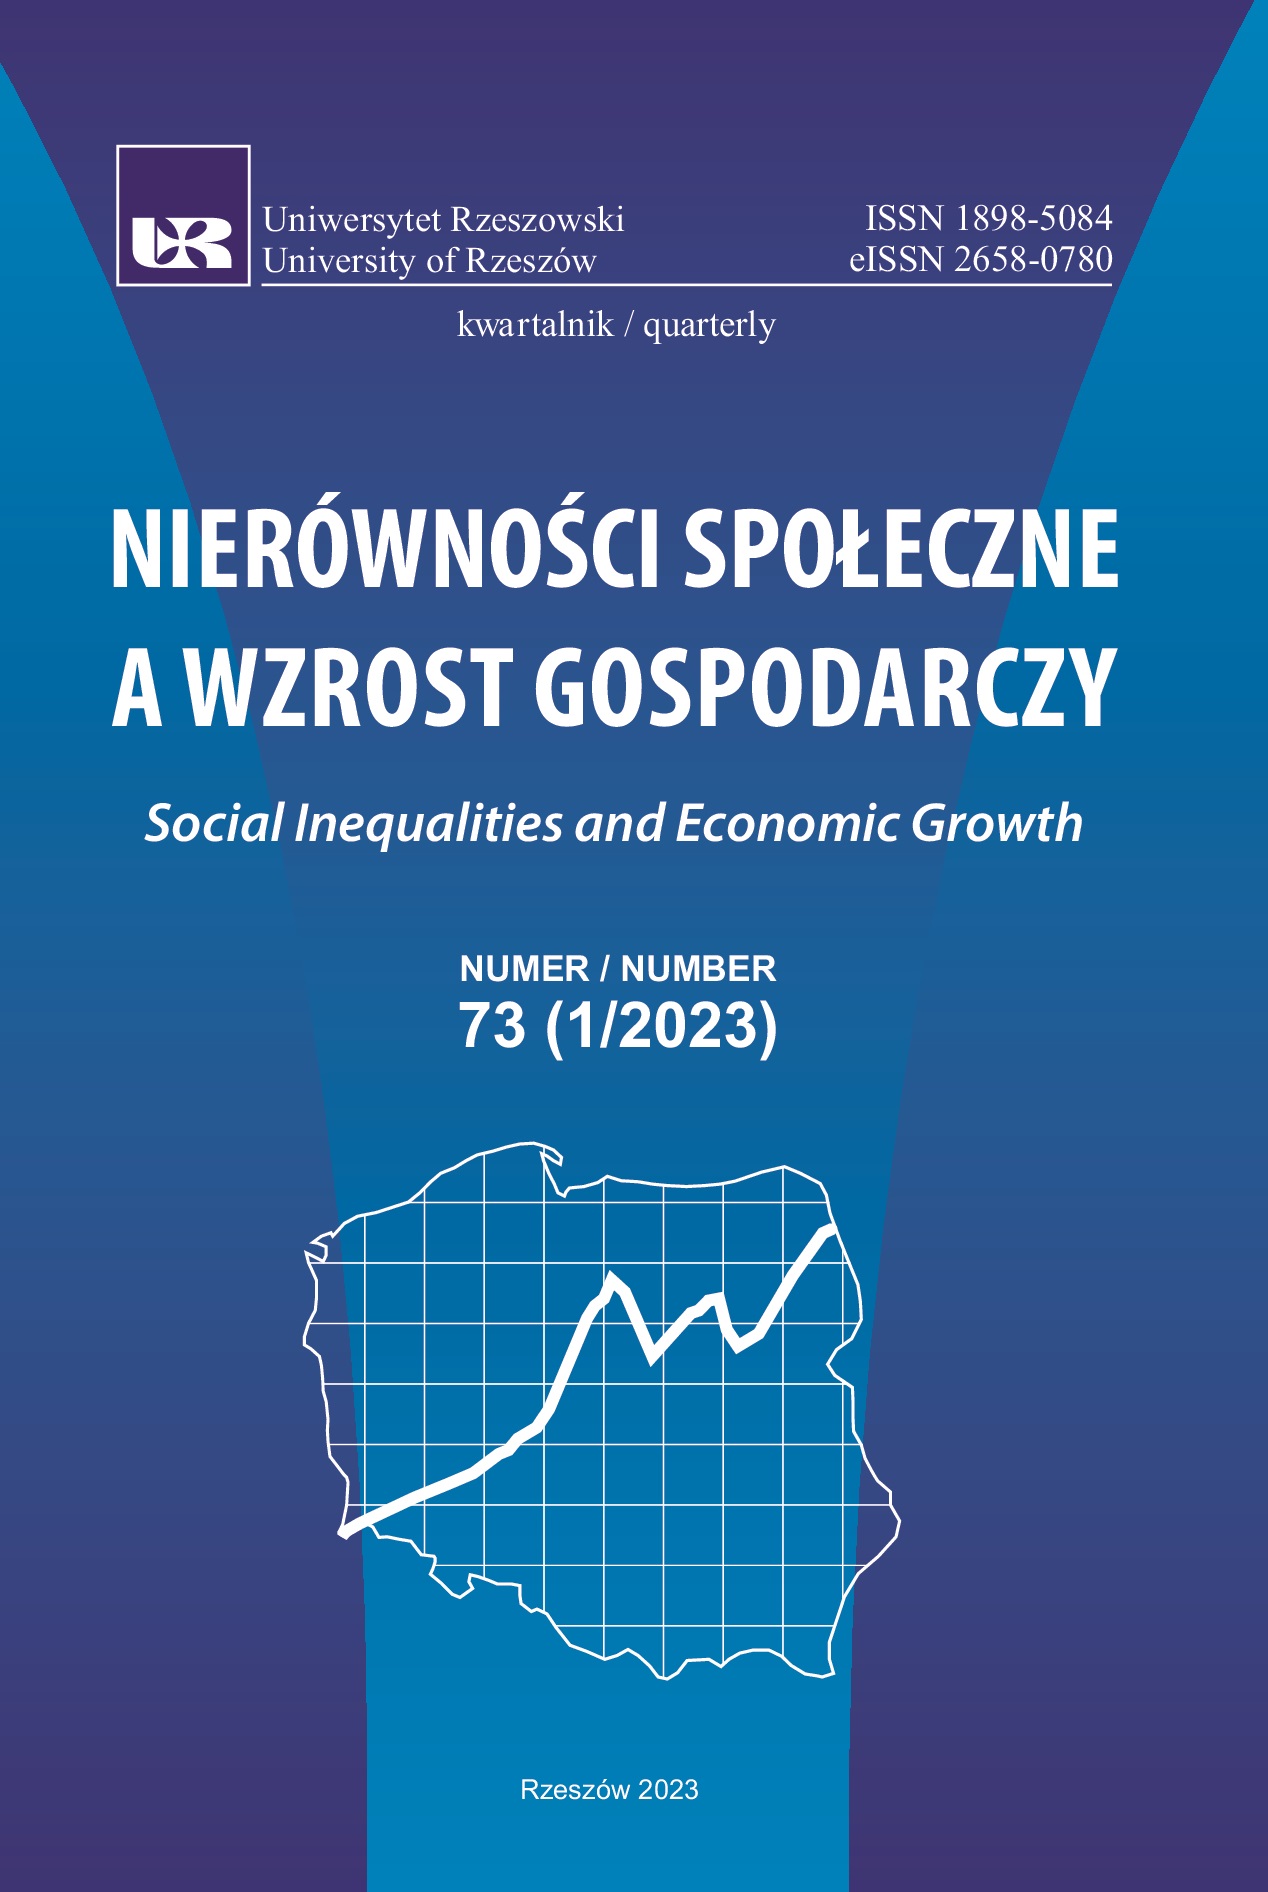 Problems and challenges in forecasting electricity production from RES in Poland
in the context of contemporary crises Cover Image